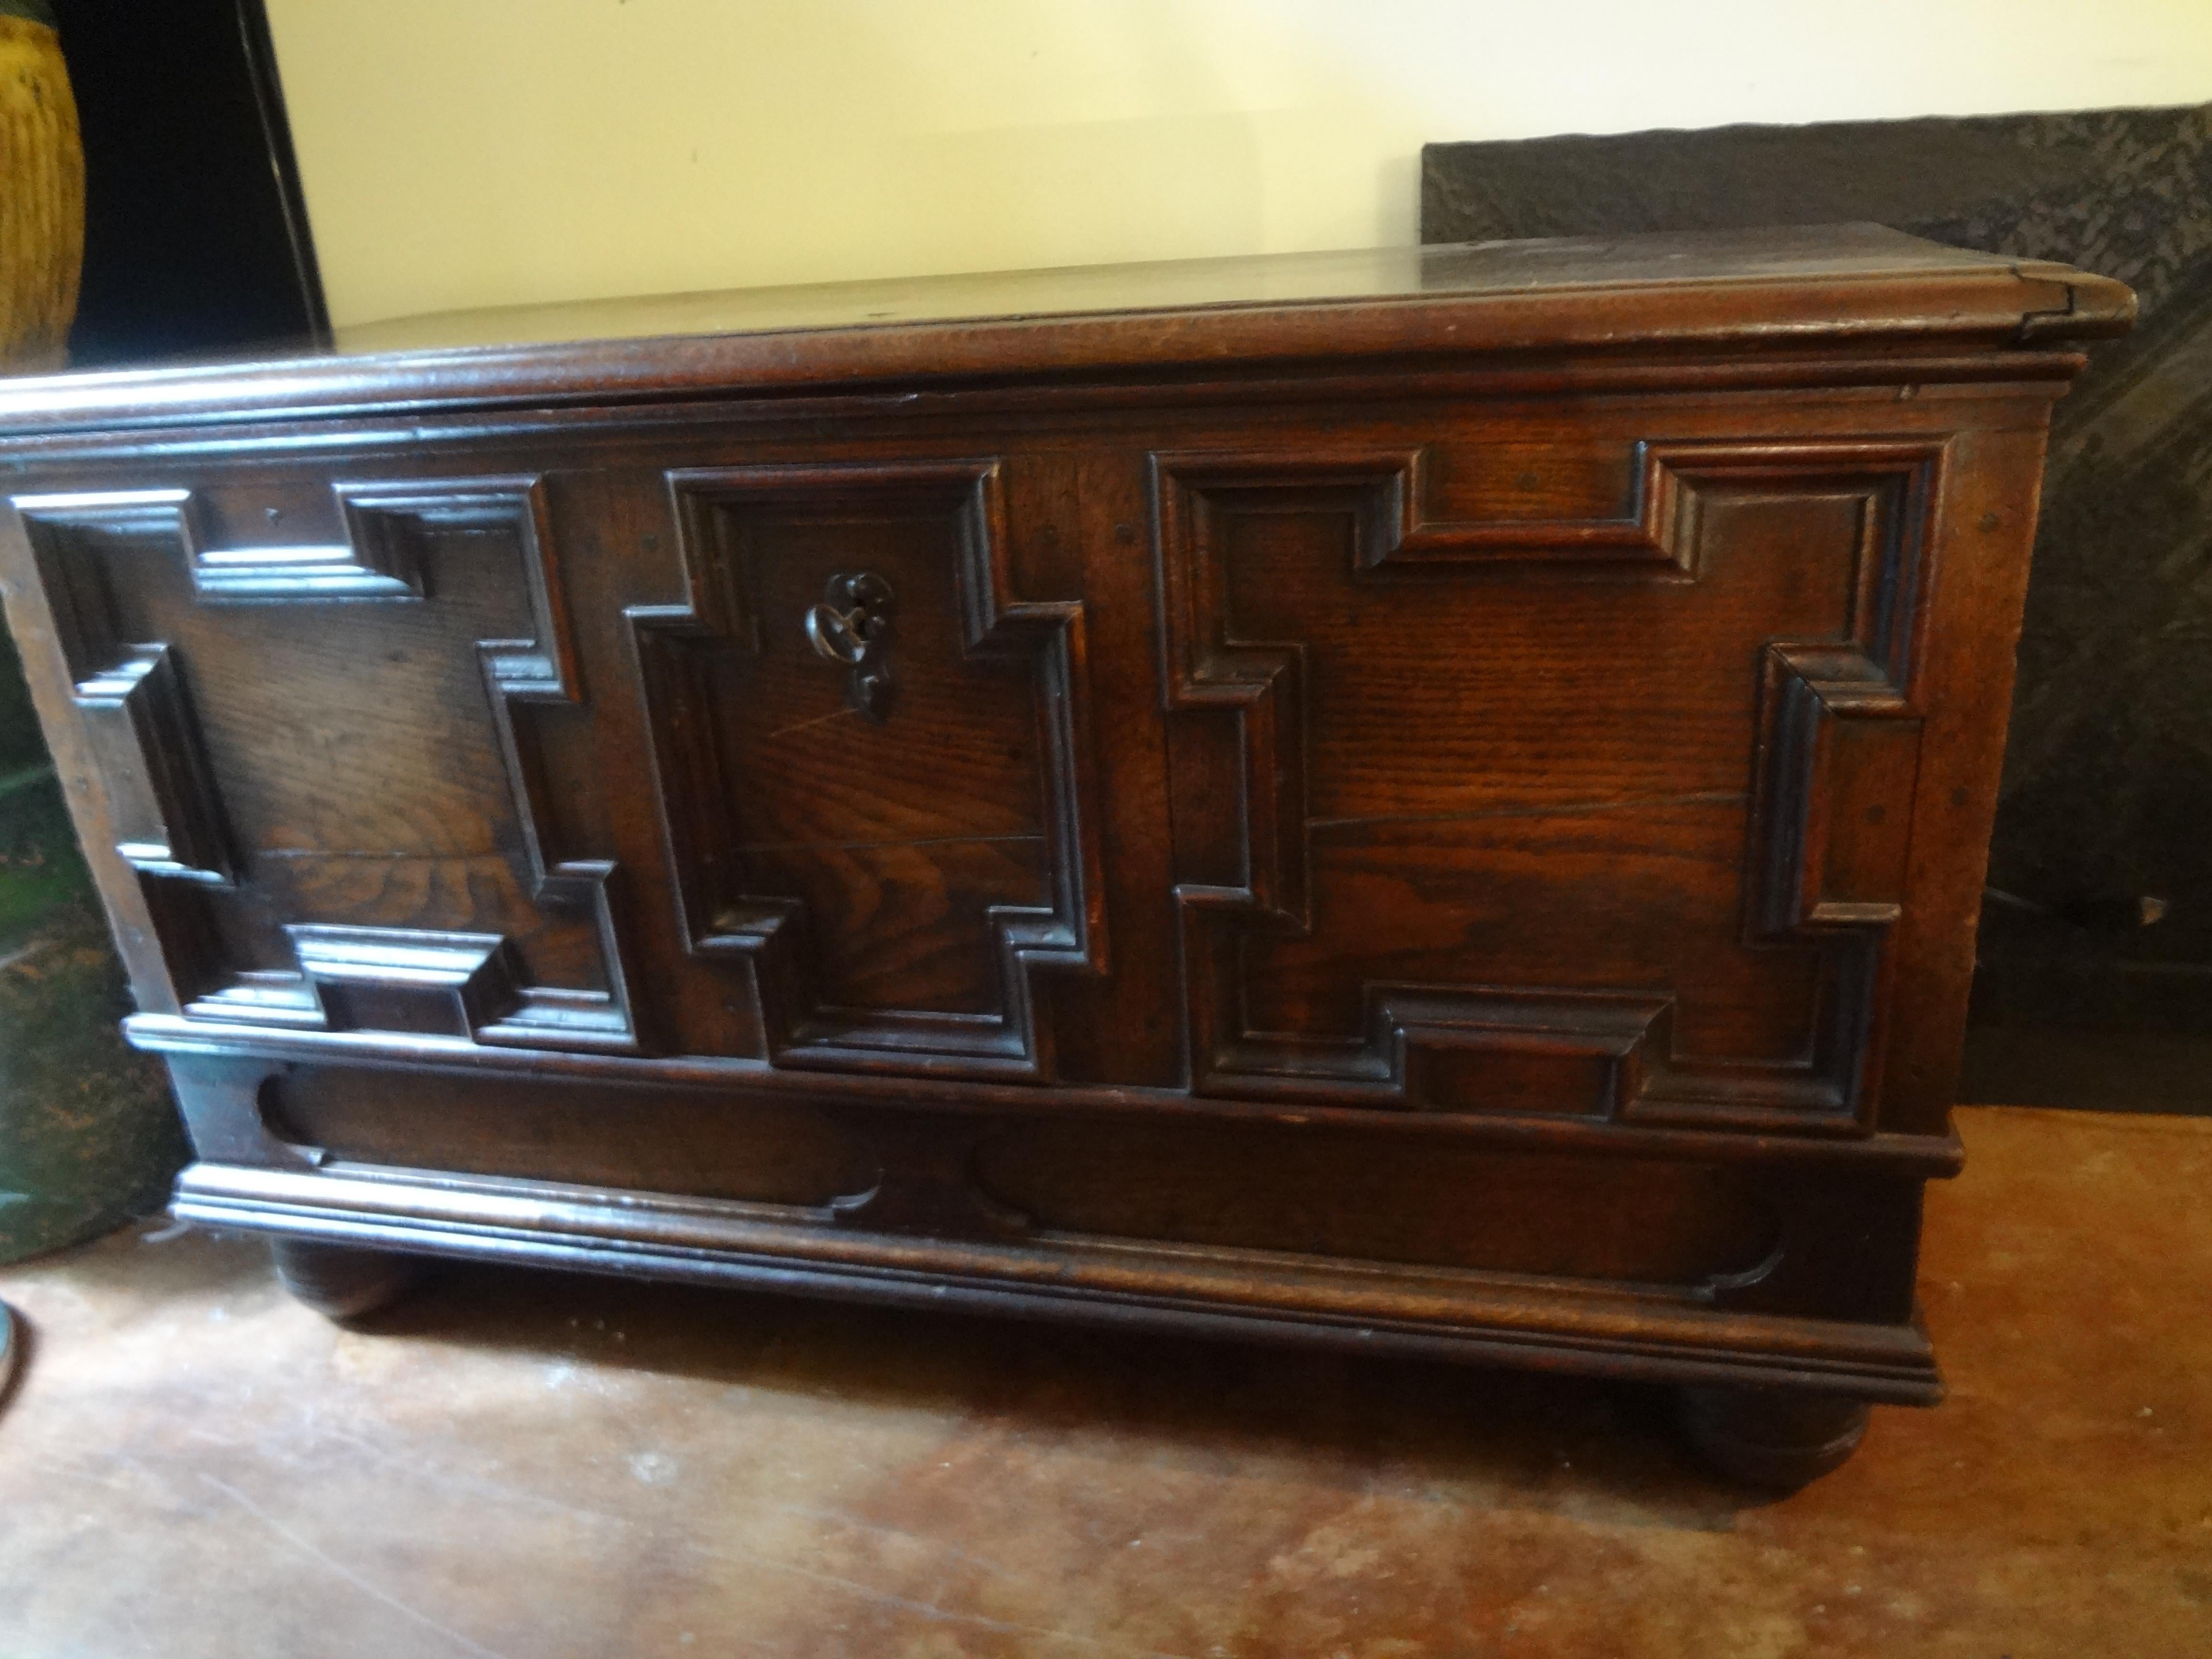 18th century French Louis XVI walnut coffer or blanket chest.
18th century French Louis XVI, Renaissance or Gothic style walnut coffer or chest from Dijon.
This gorgeous coffer, trunk or blanket chest has a beautiful triple panel front, hinged plank